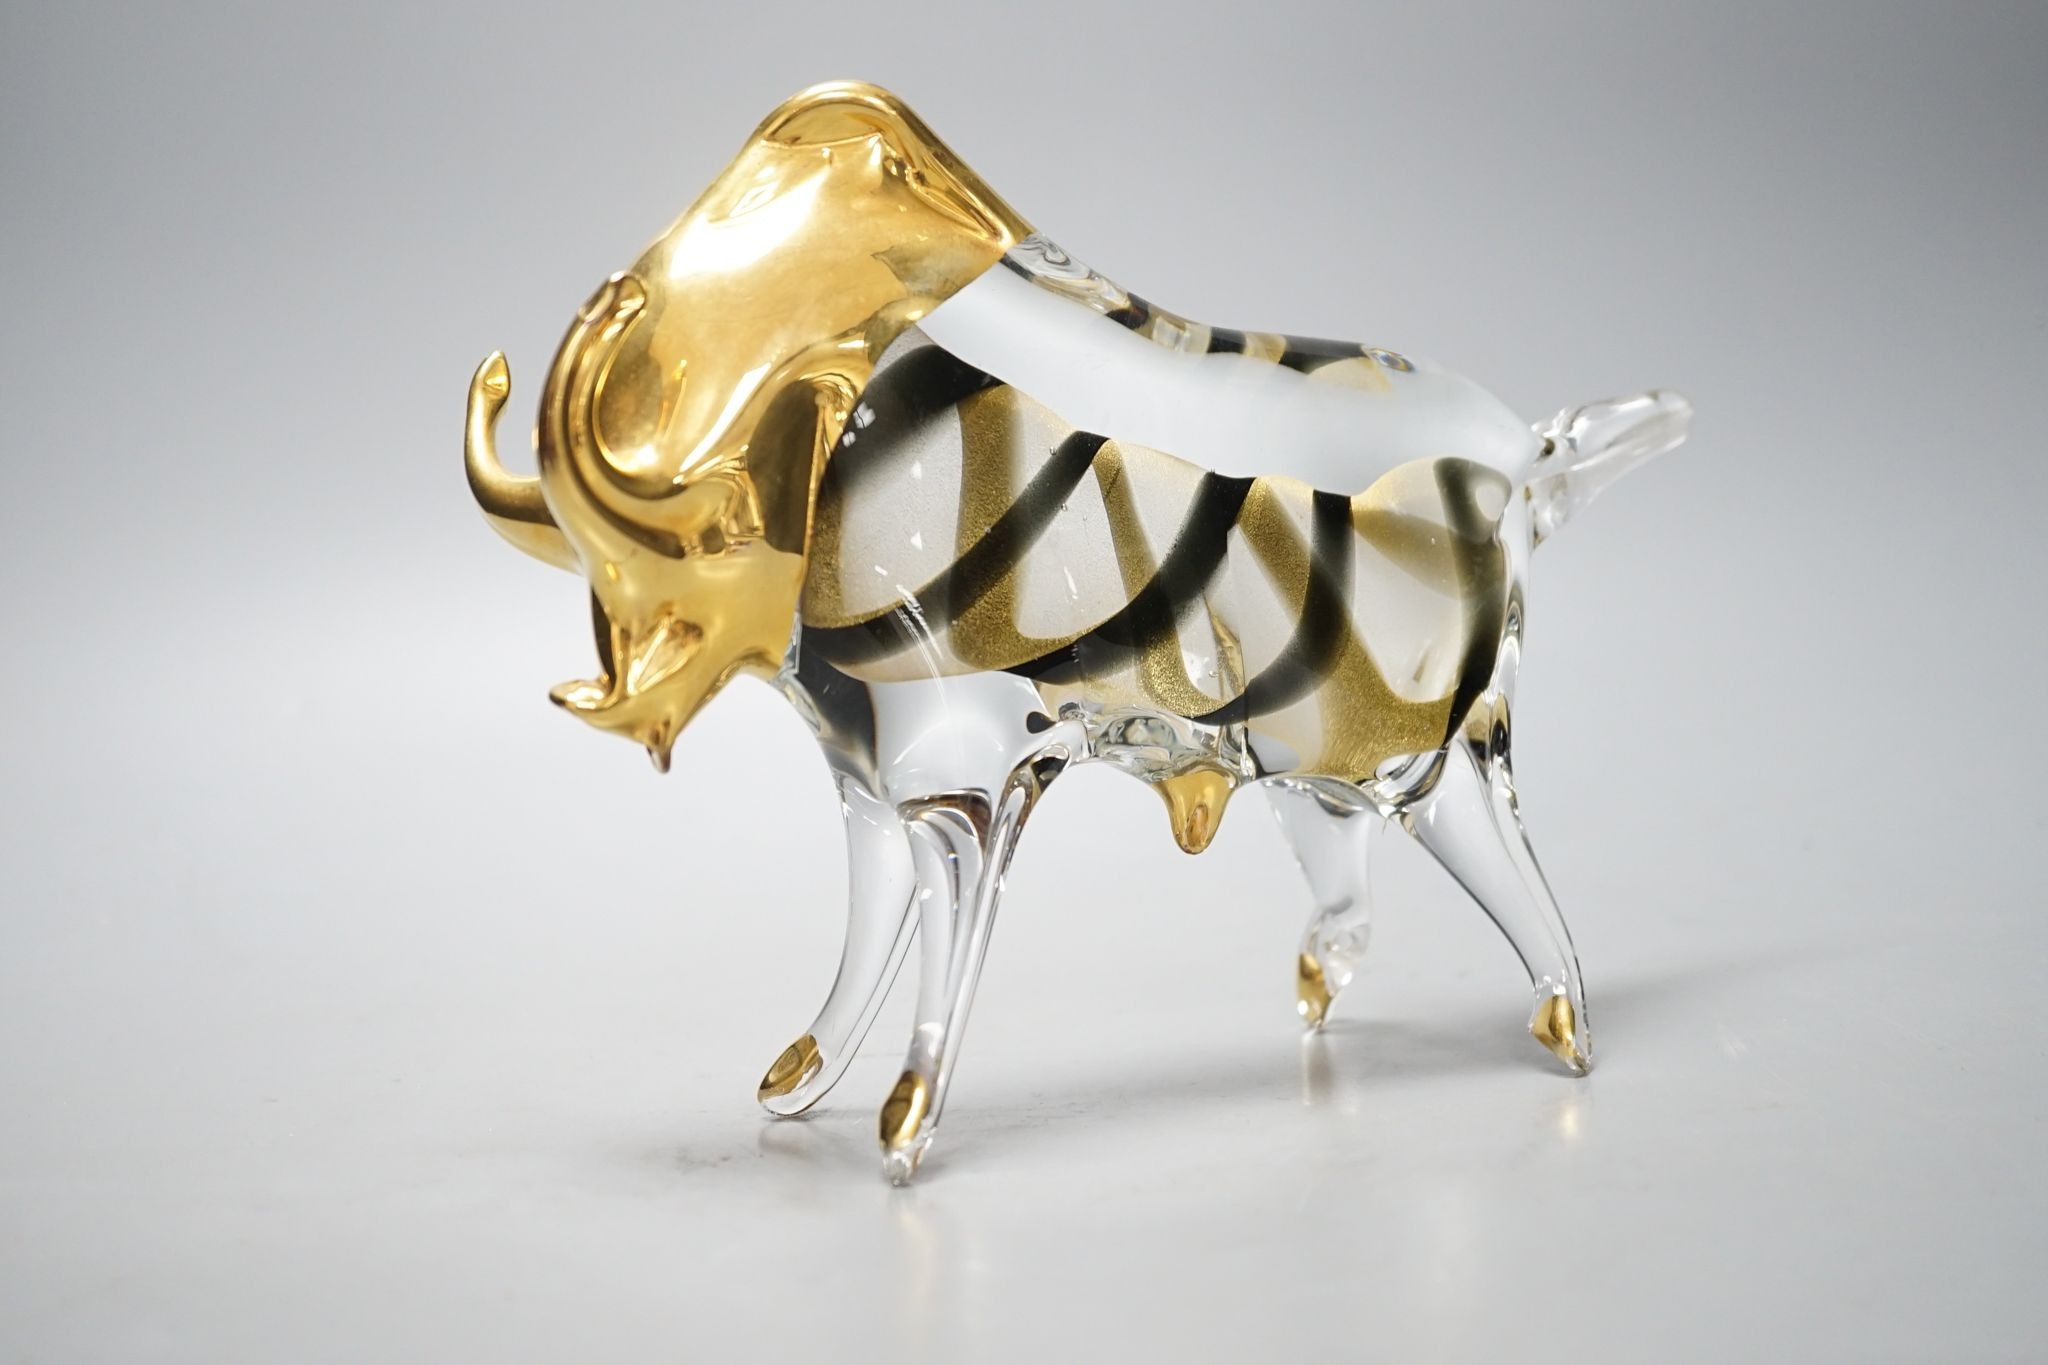 A Murano glass model of a bull, 17.5 cms high x 23 cms wide